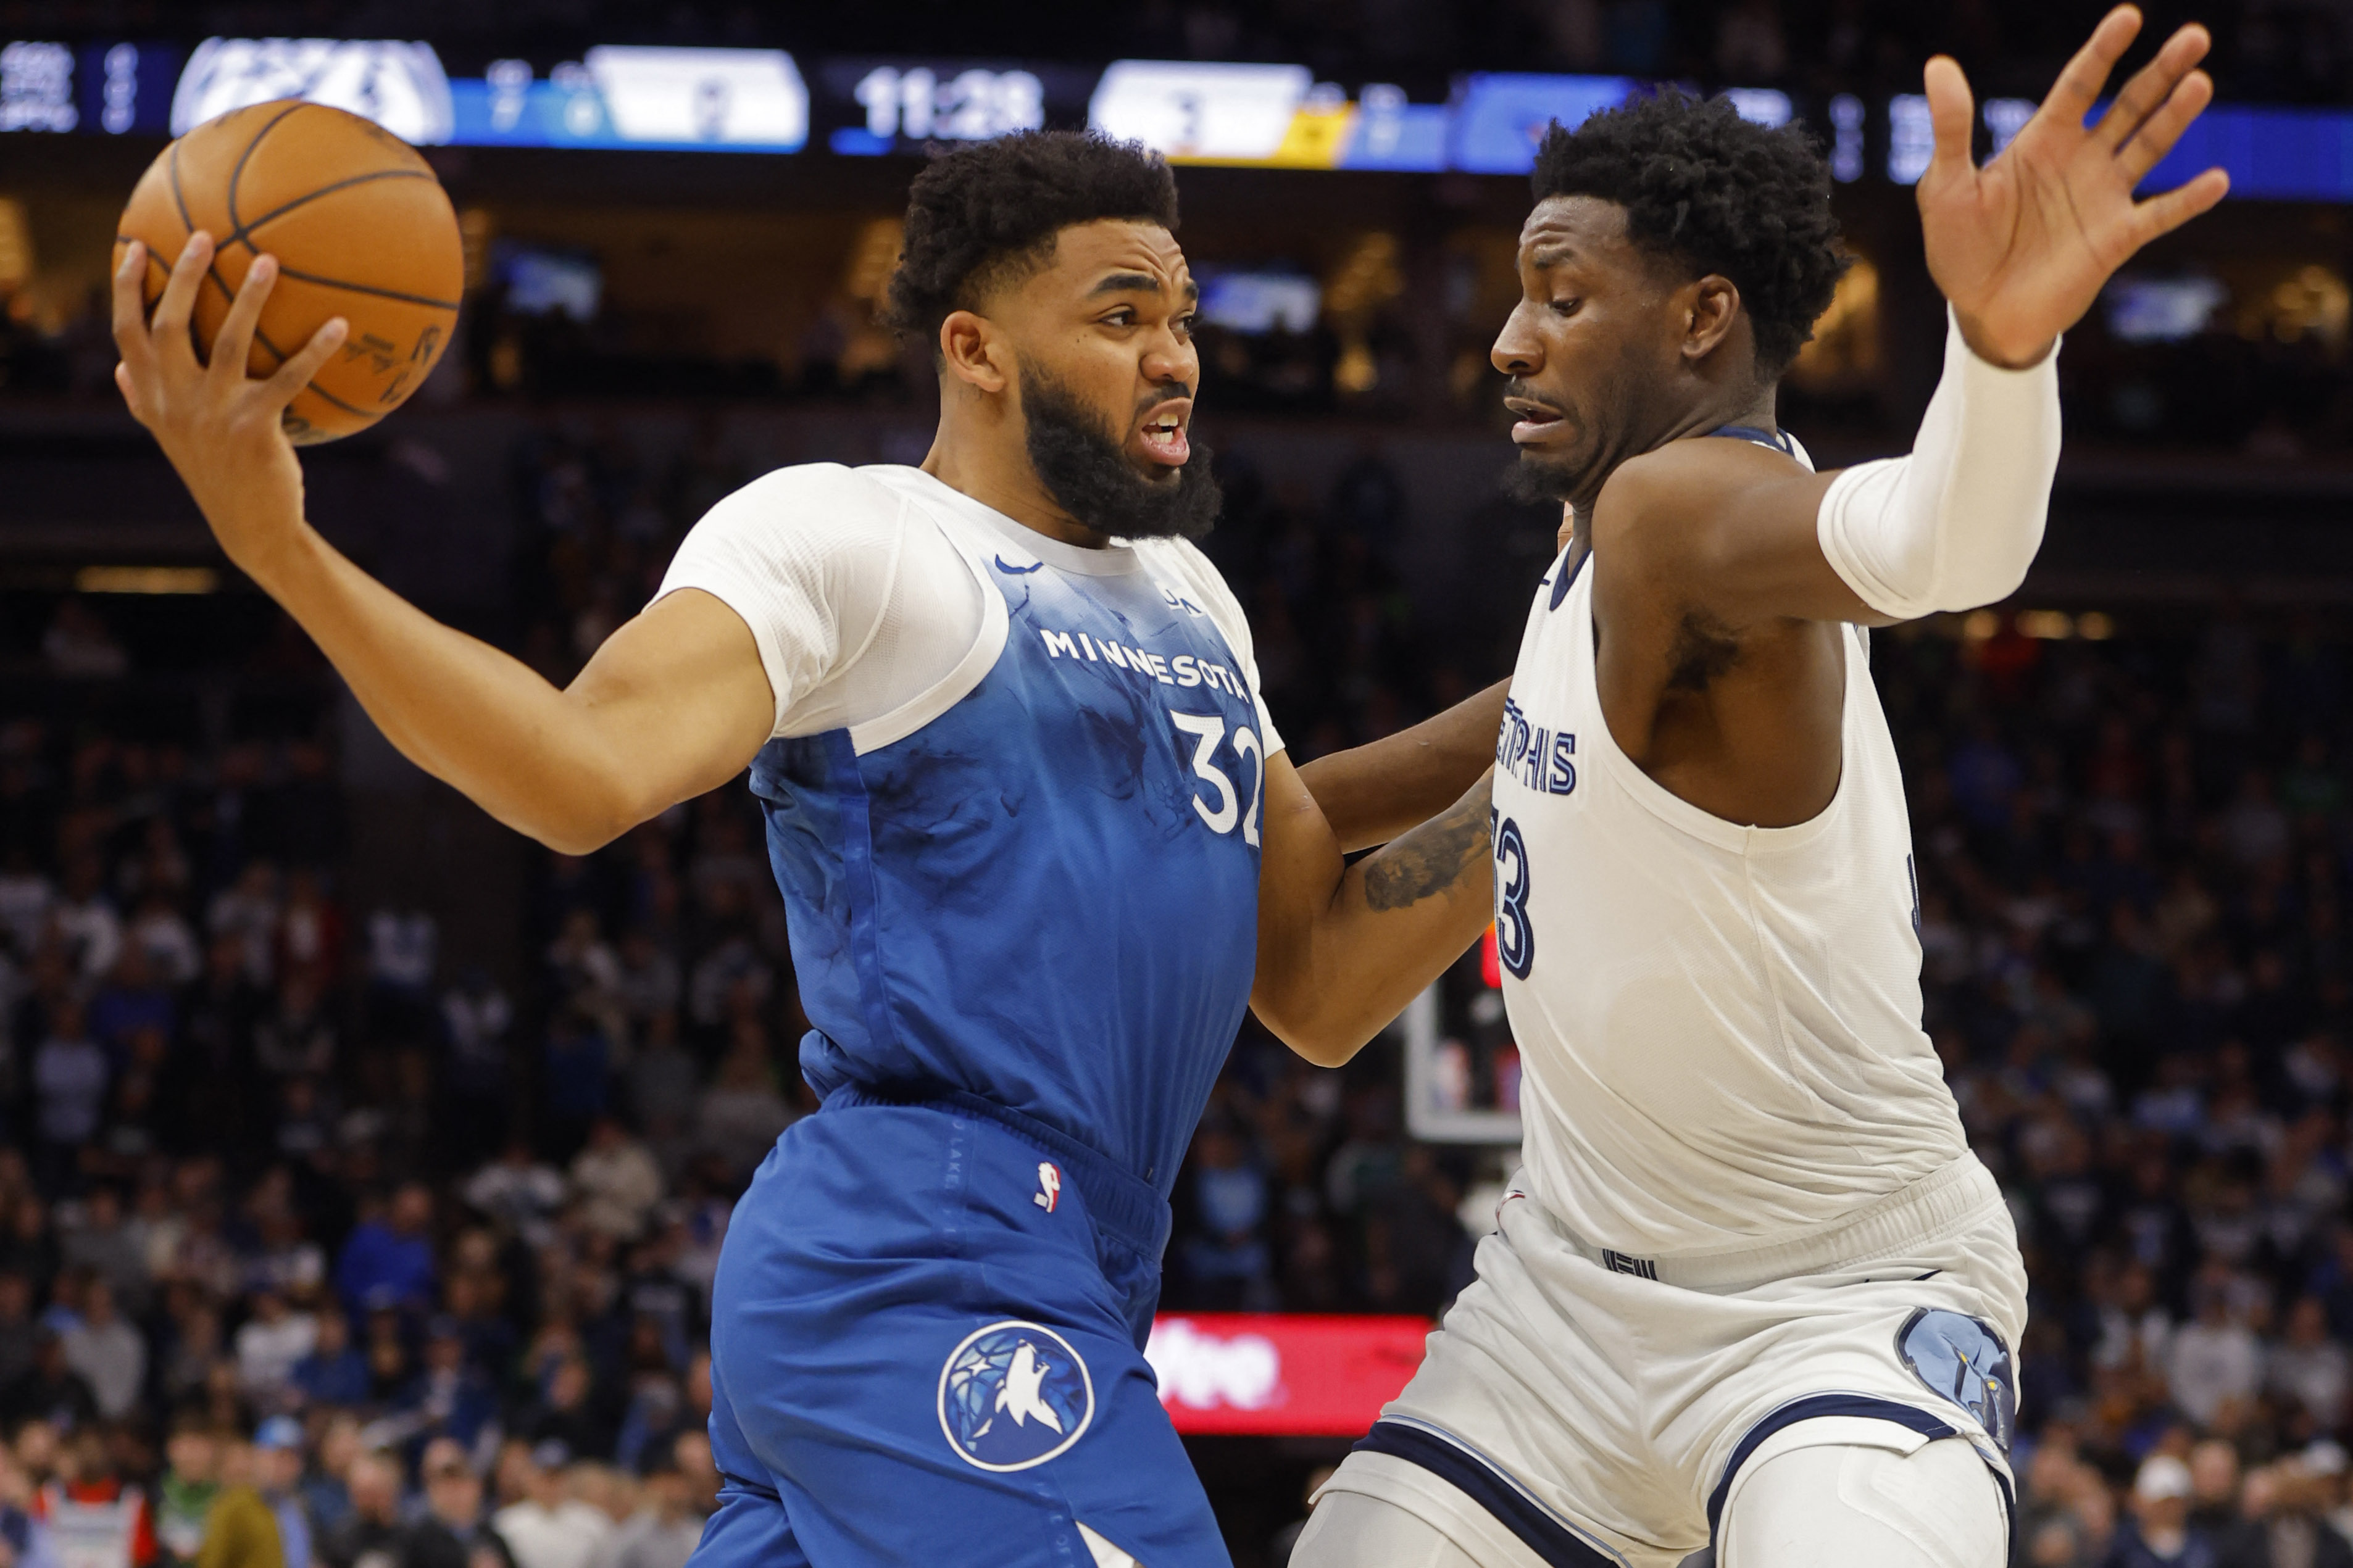 NBA: Strong second half lifts Timberwolves over Grizzlies